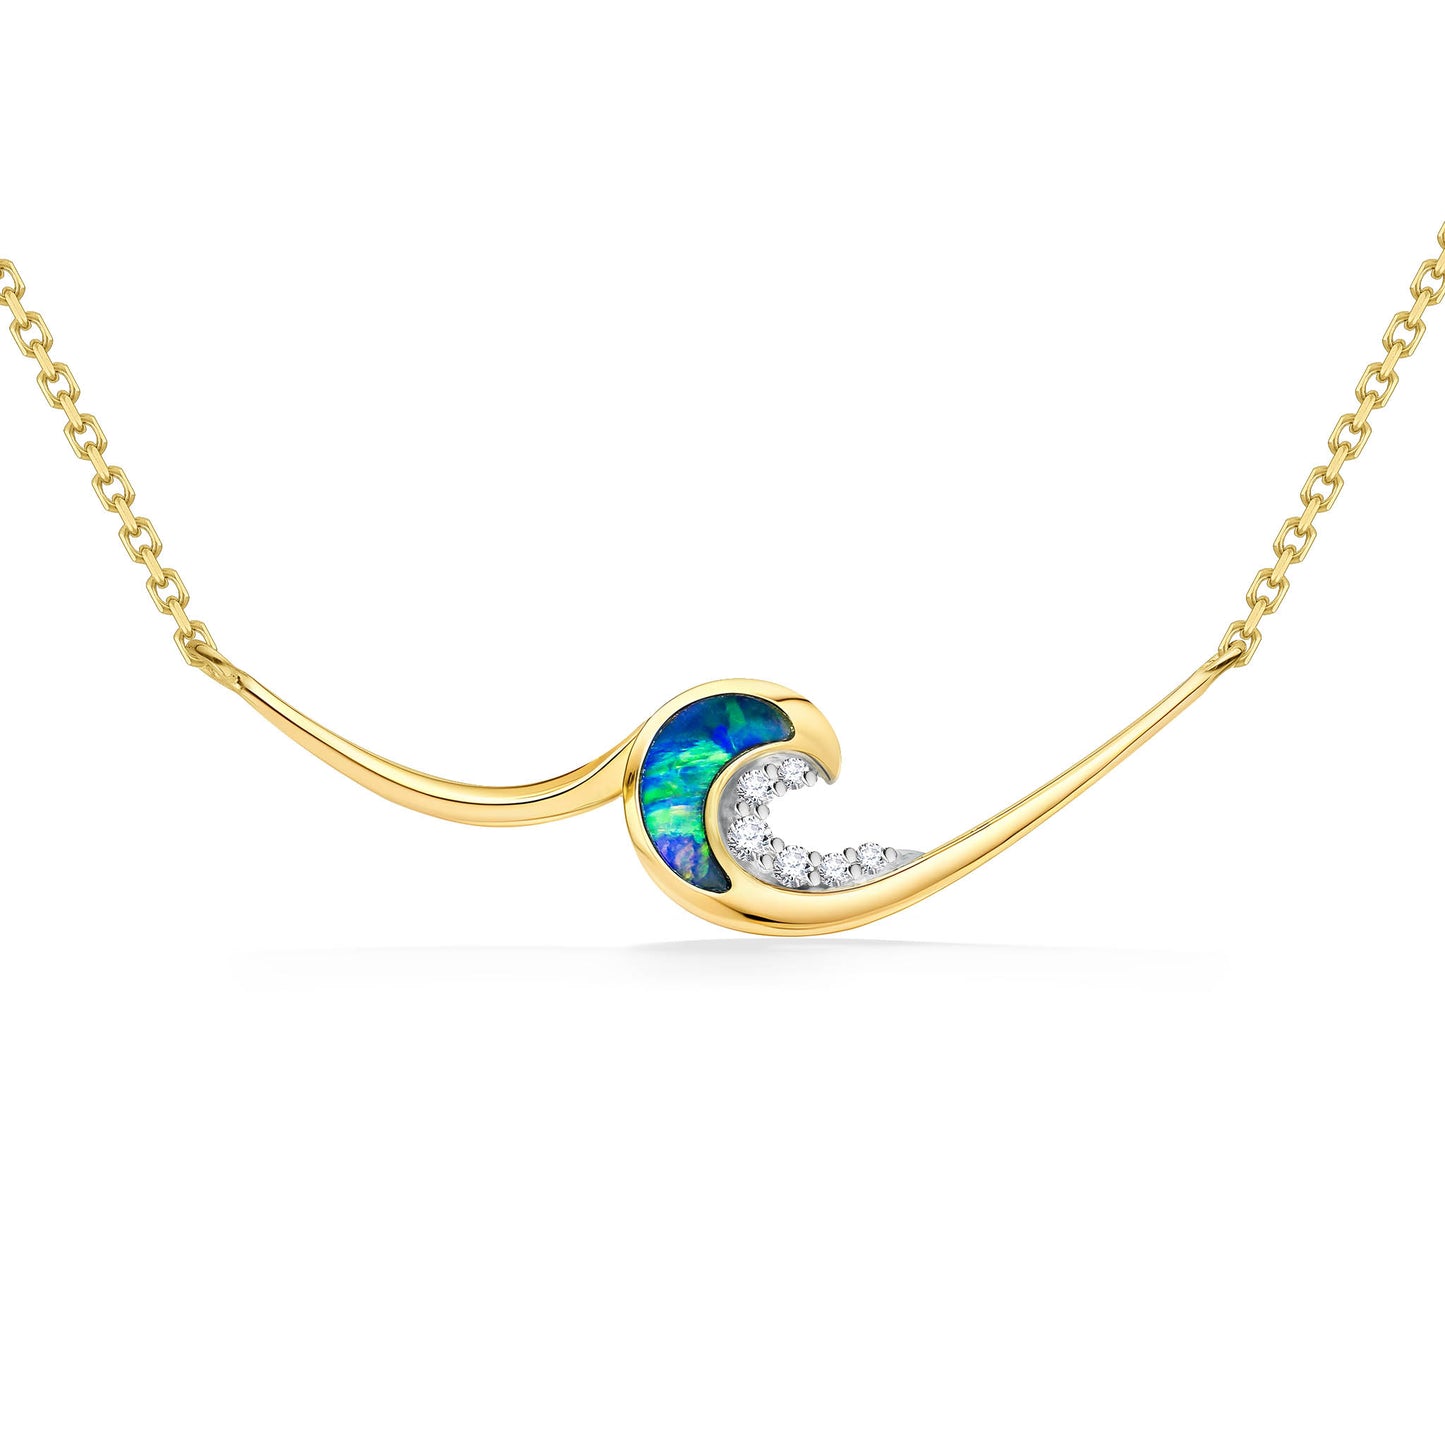 44228 - 14K Yellow Gold - Ocean Swell Necklace